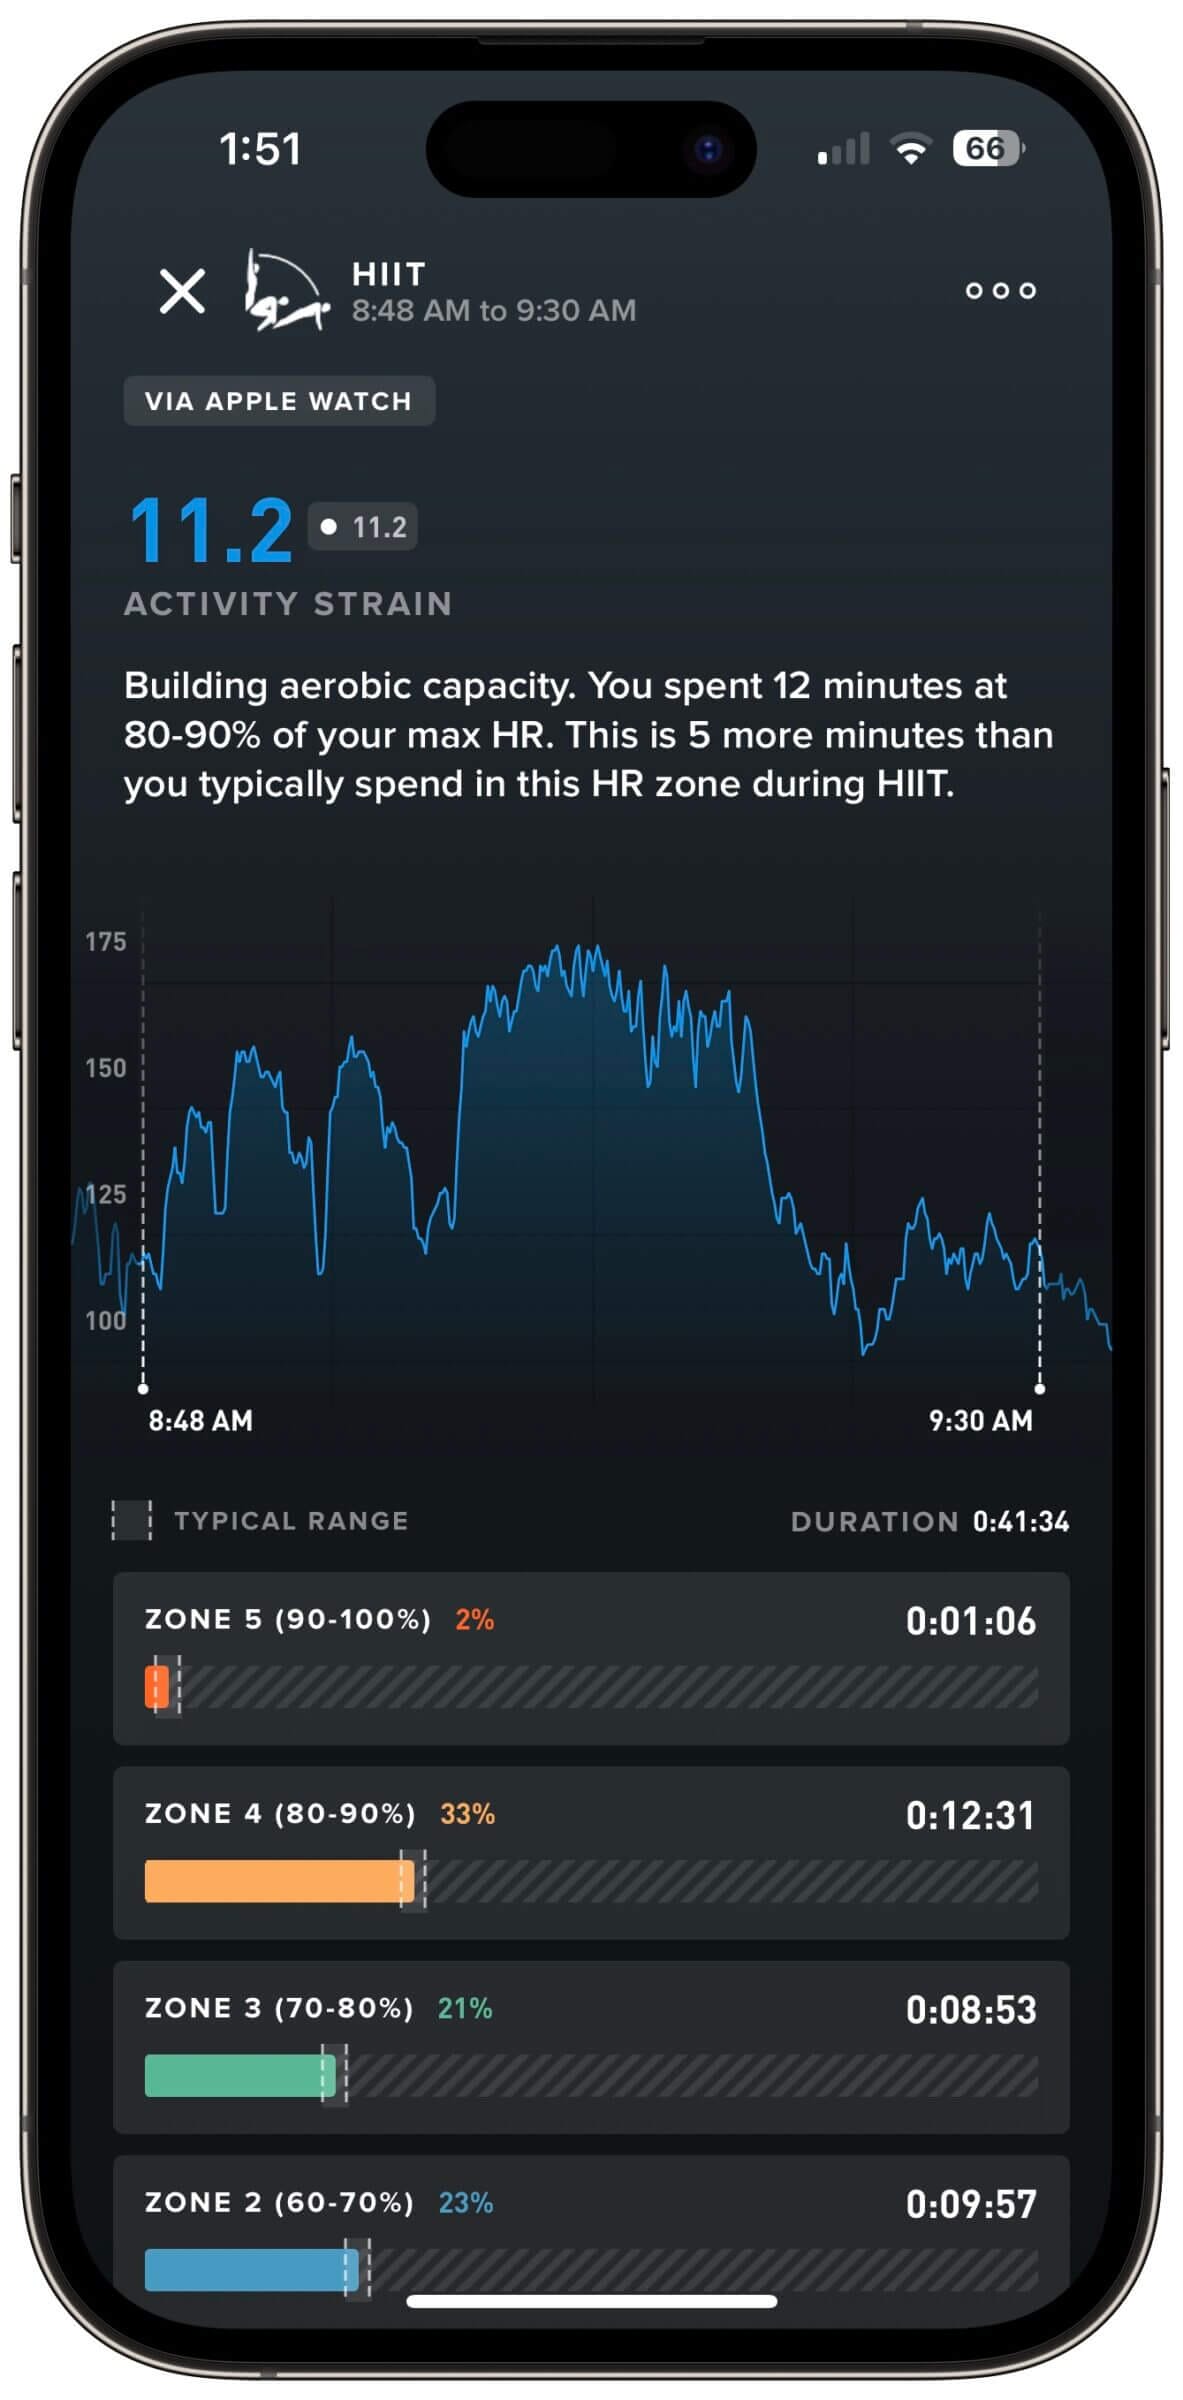 WHOOP gives you a detailed breakdown of your heart rate zones for each workout